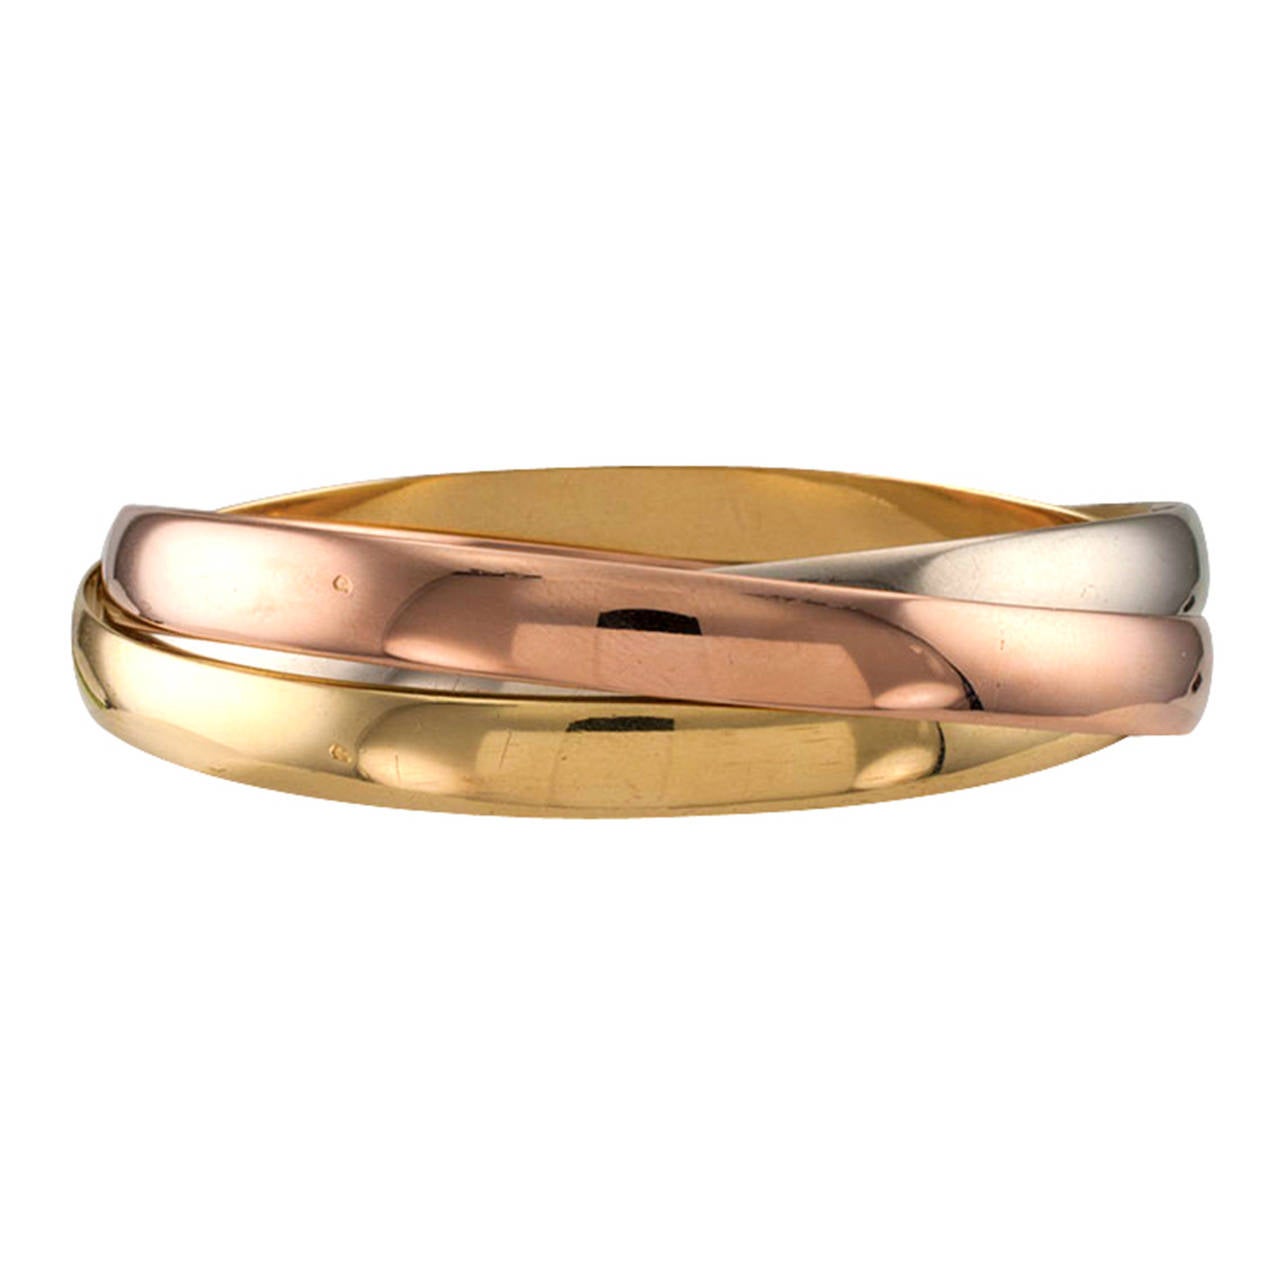 One of the definitions offered by the dictionary states that three things that form a unit are a trinity.  This sensuous and visually appealing bracelet comprises a trinity of 18 karat gold bands, pink, yellow and white.  They simply roll over the